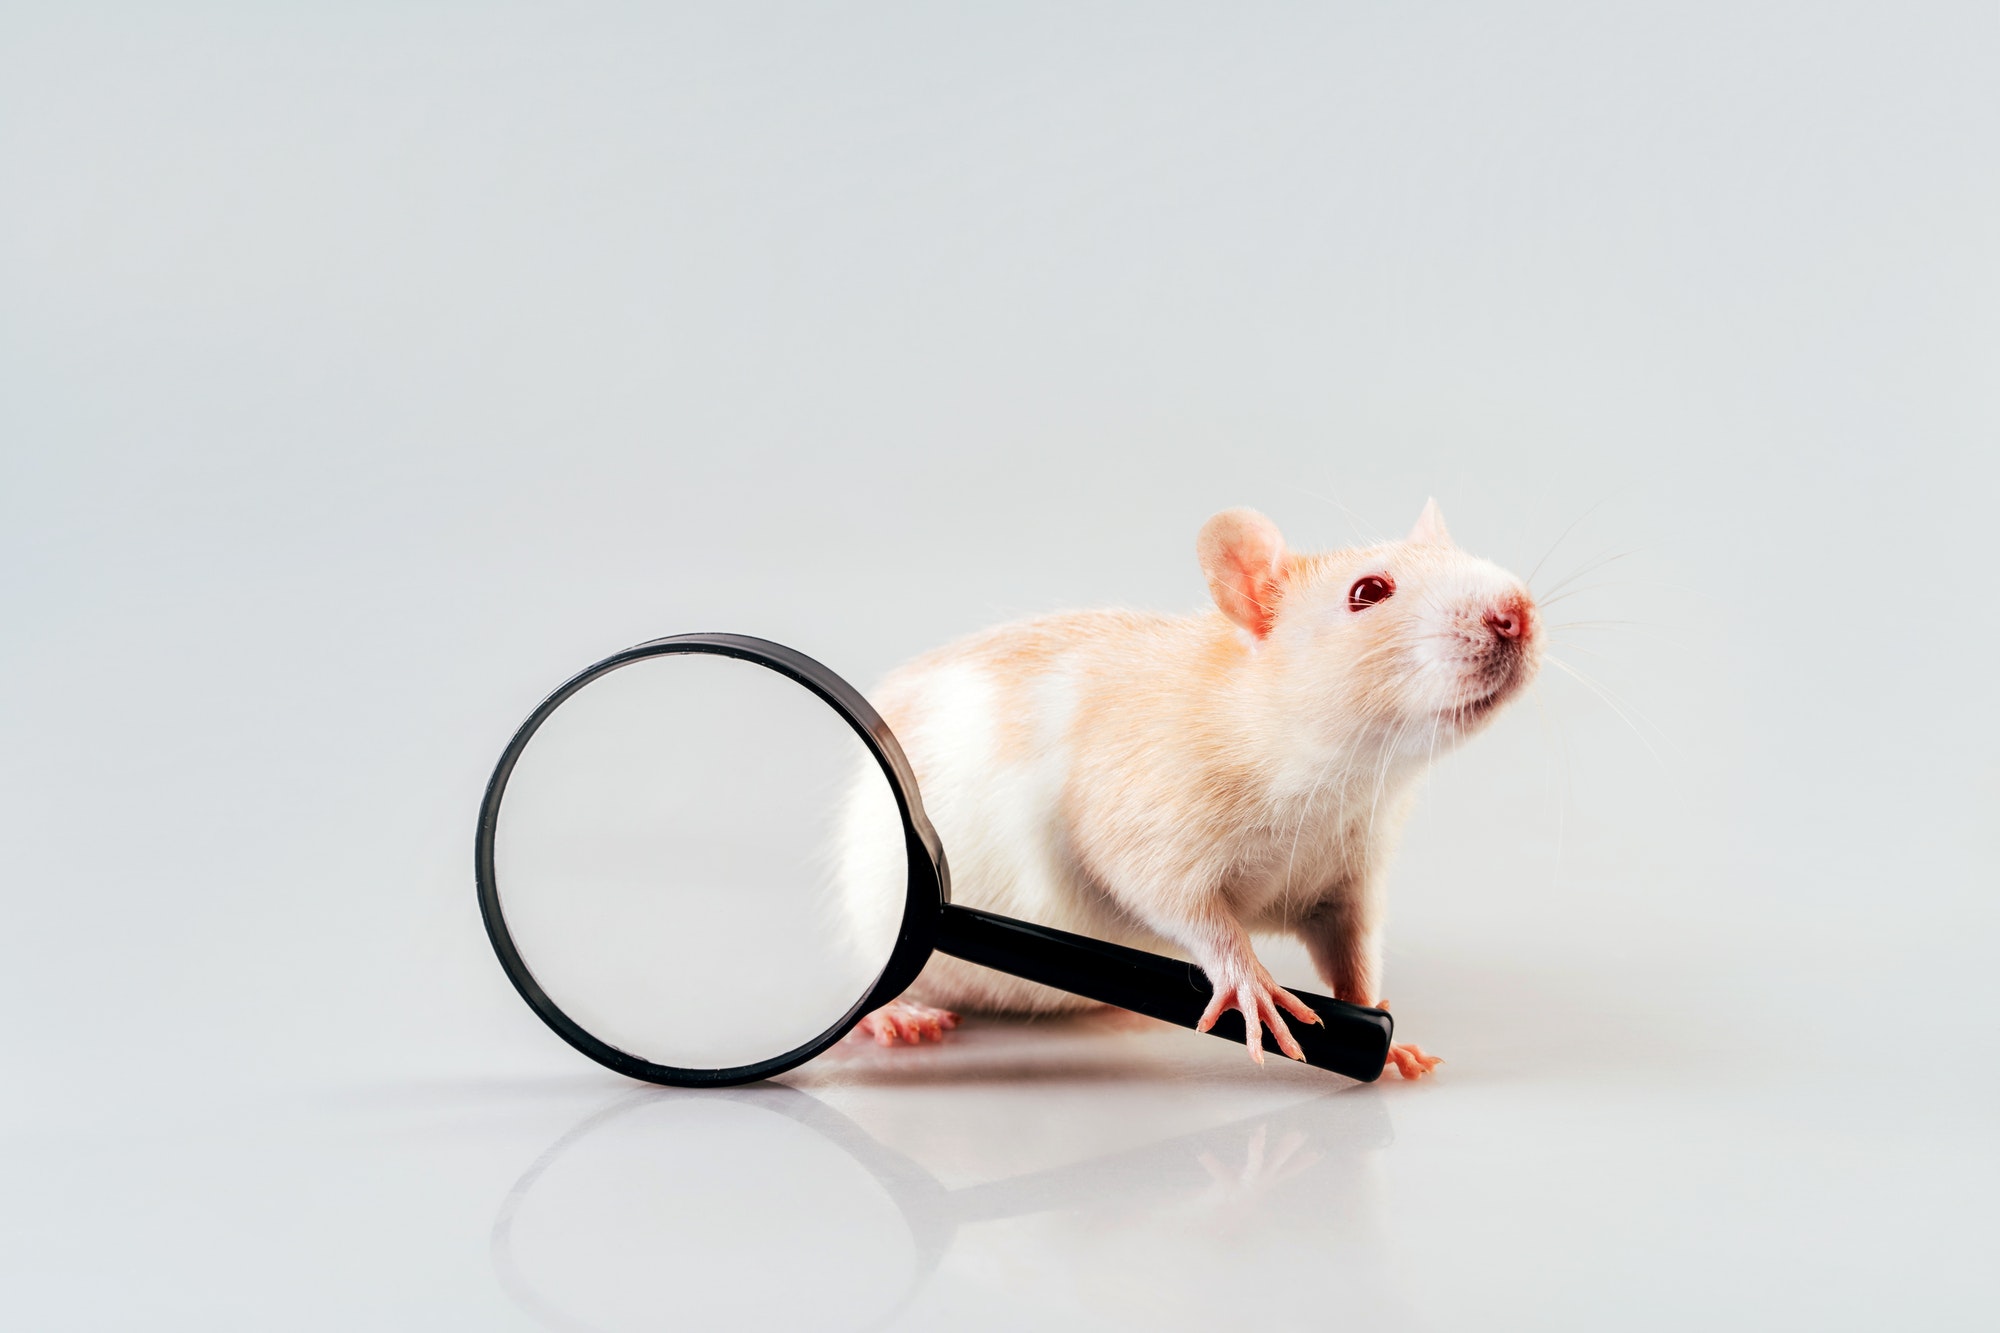 White beige rat sitting with a large magnifying magnifier in its paws